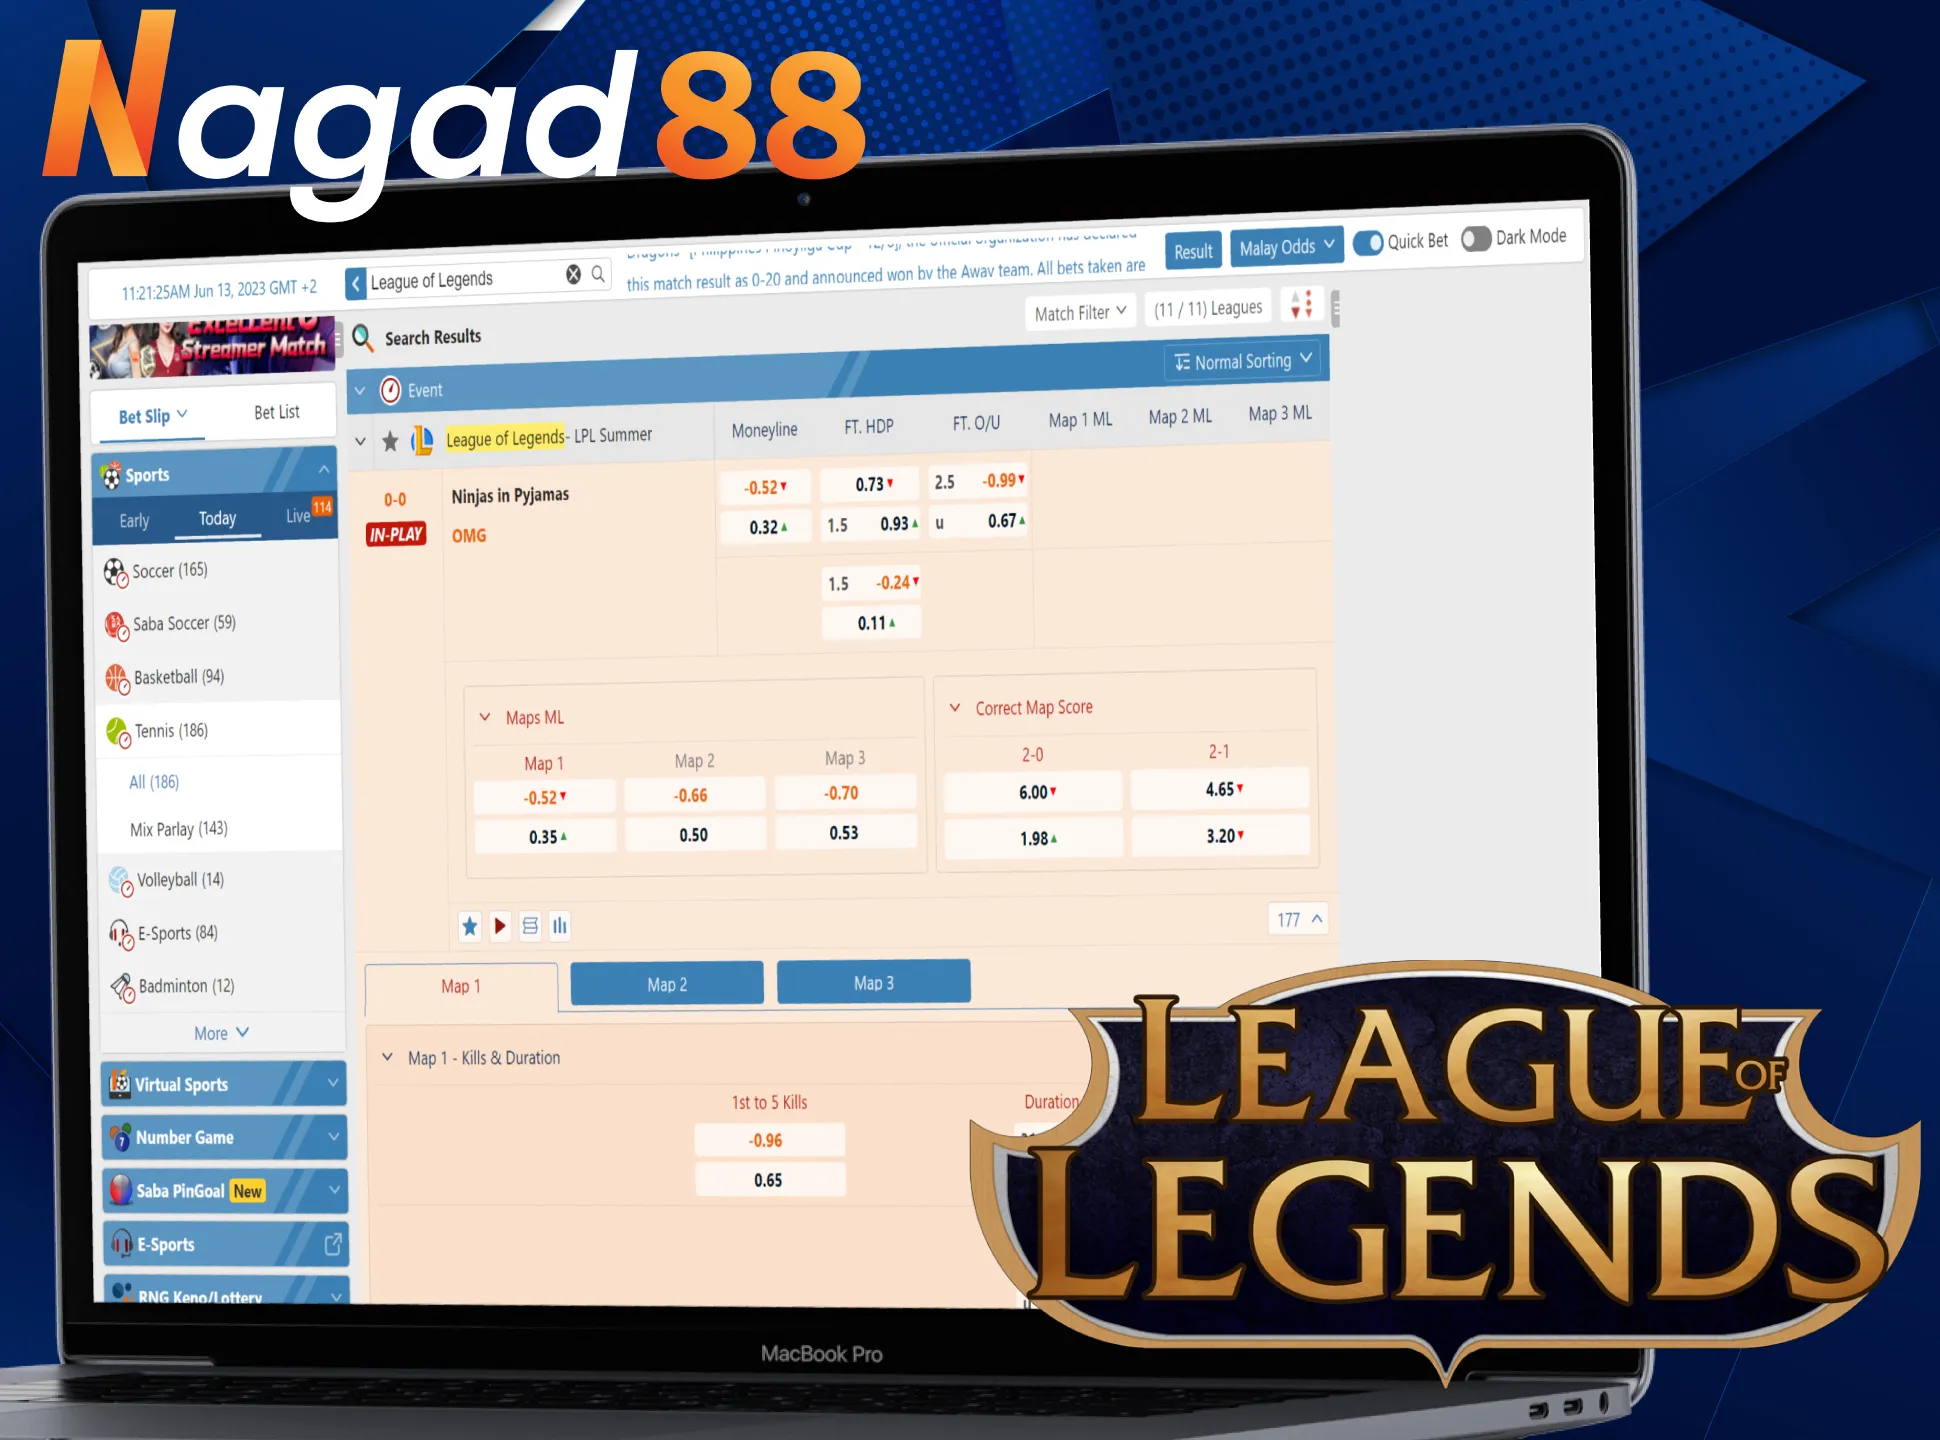 Place your bet on the League of Legends tournament at Nagad88.